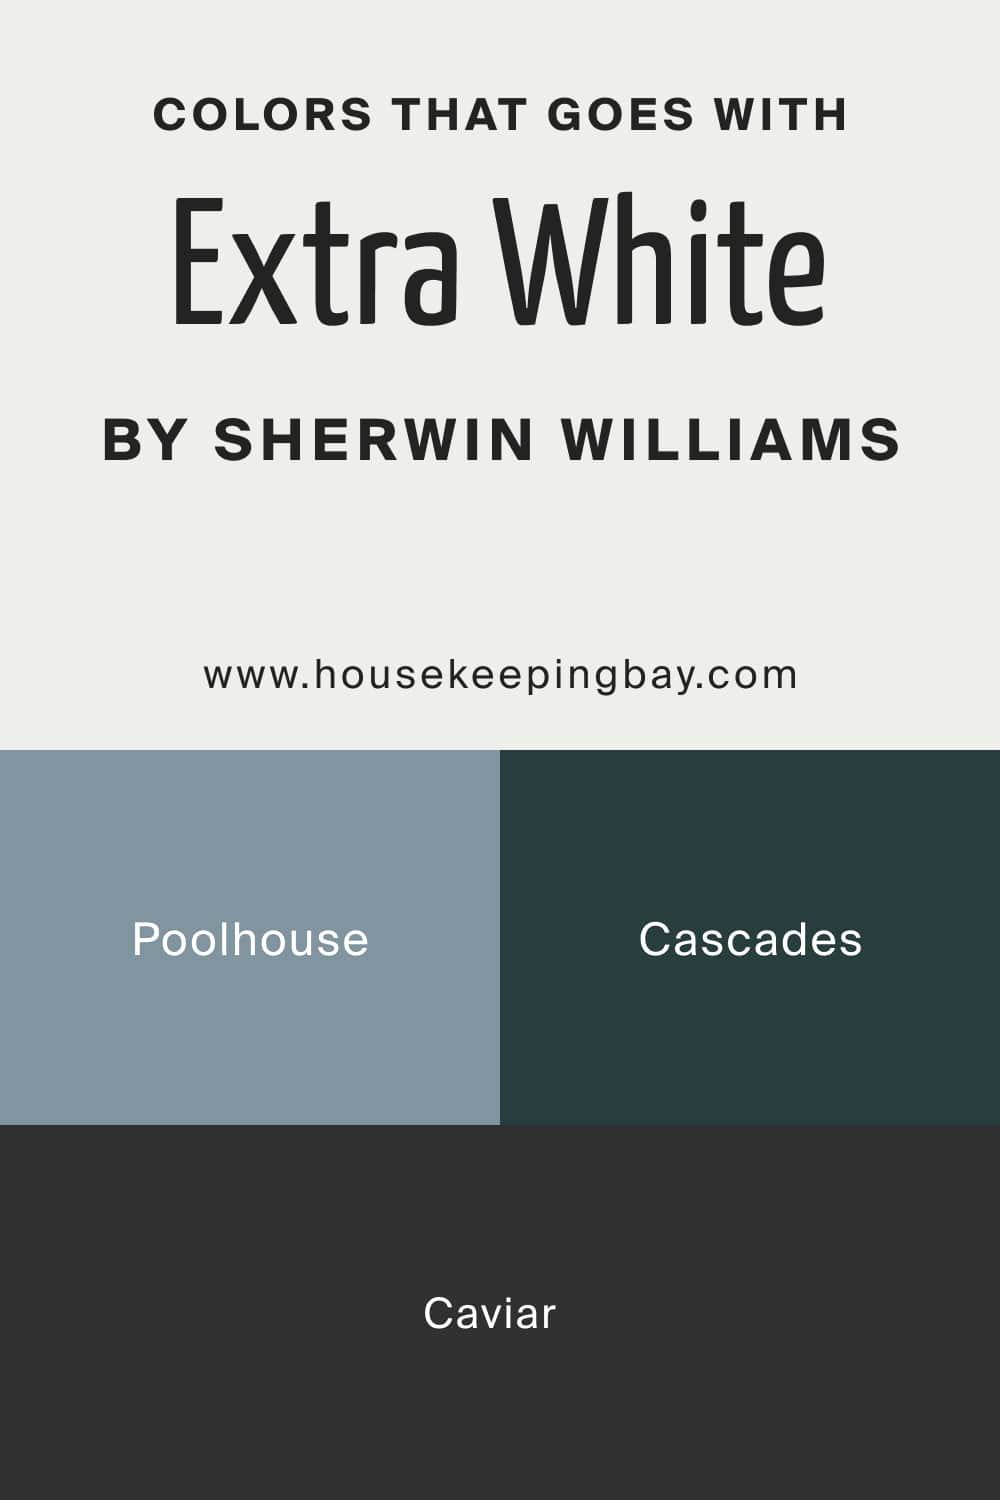 Colors that goes with Extra White SW 7006 by Sherwin Williams